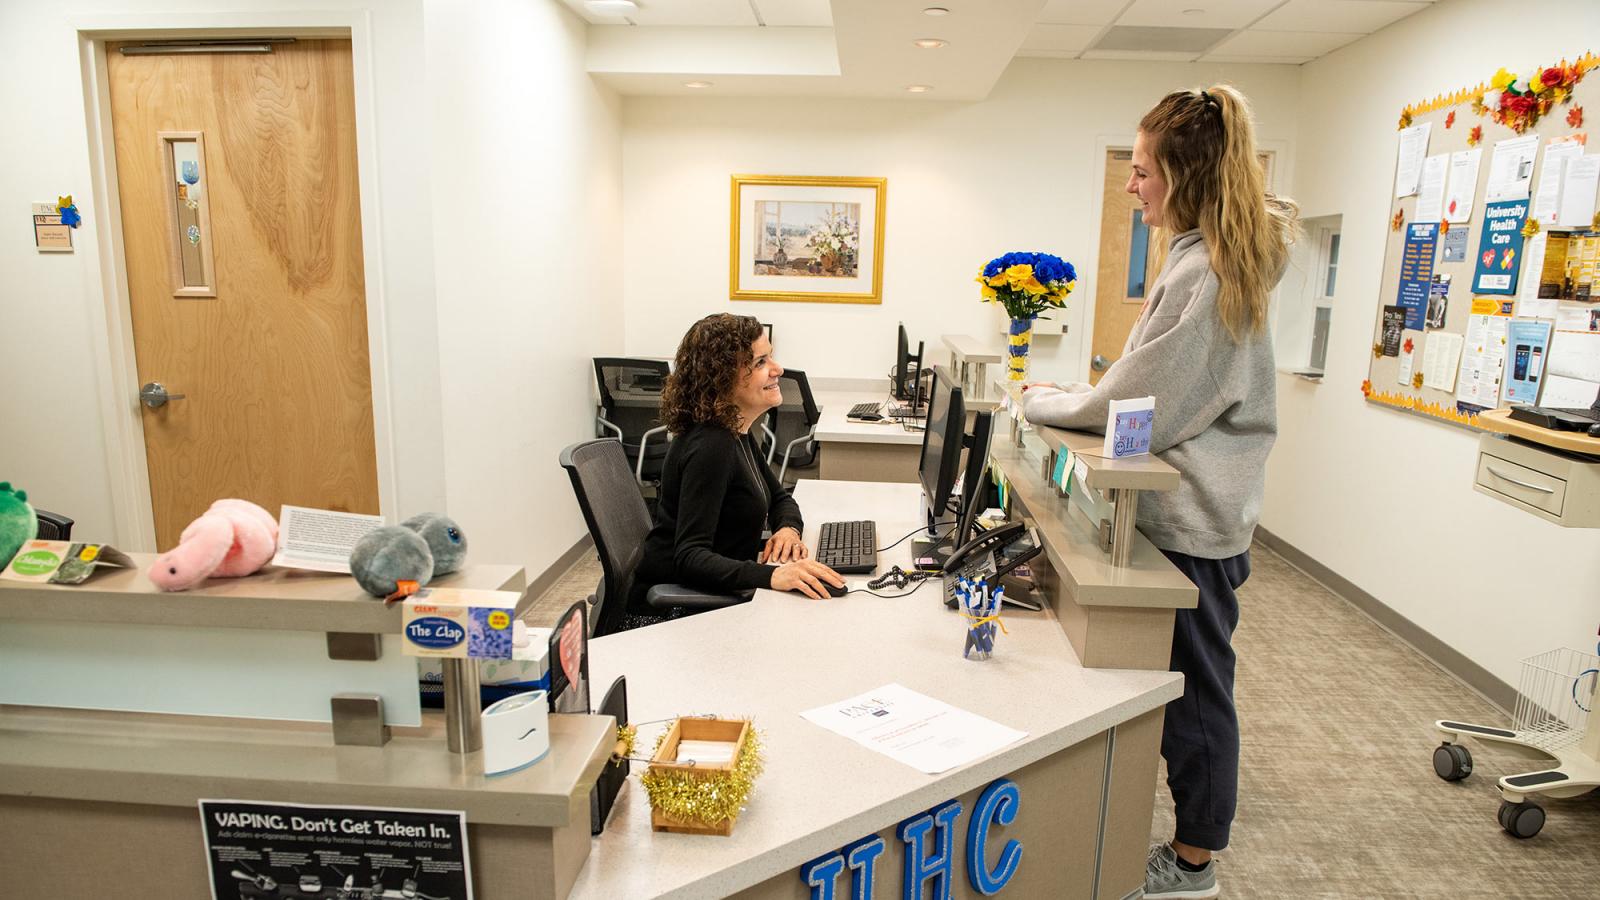 Student checking in at Pace University's Health Care center.